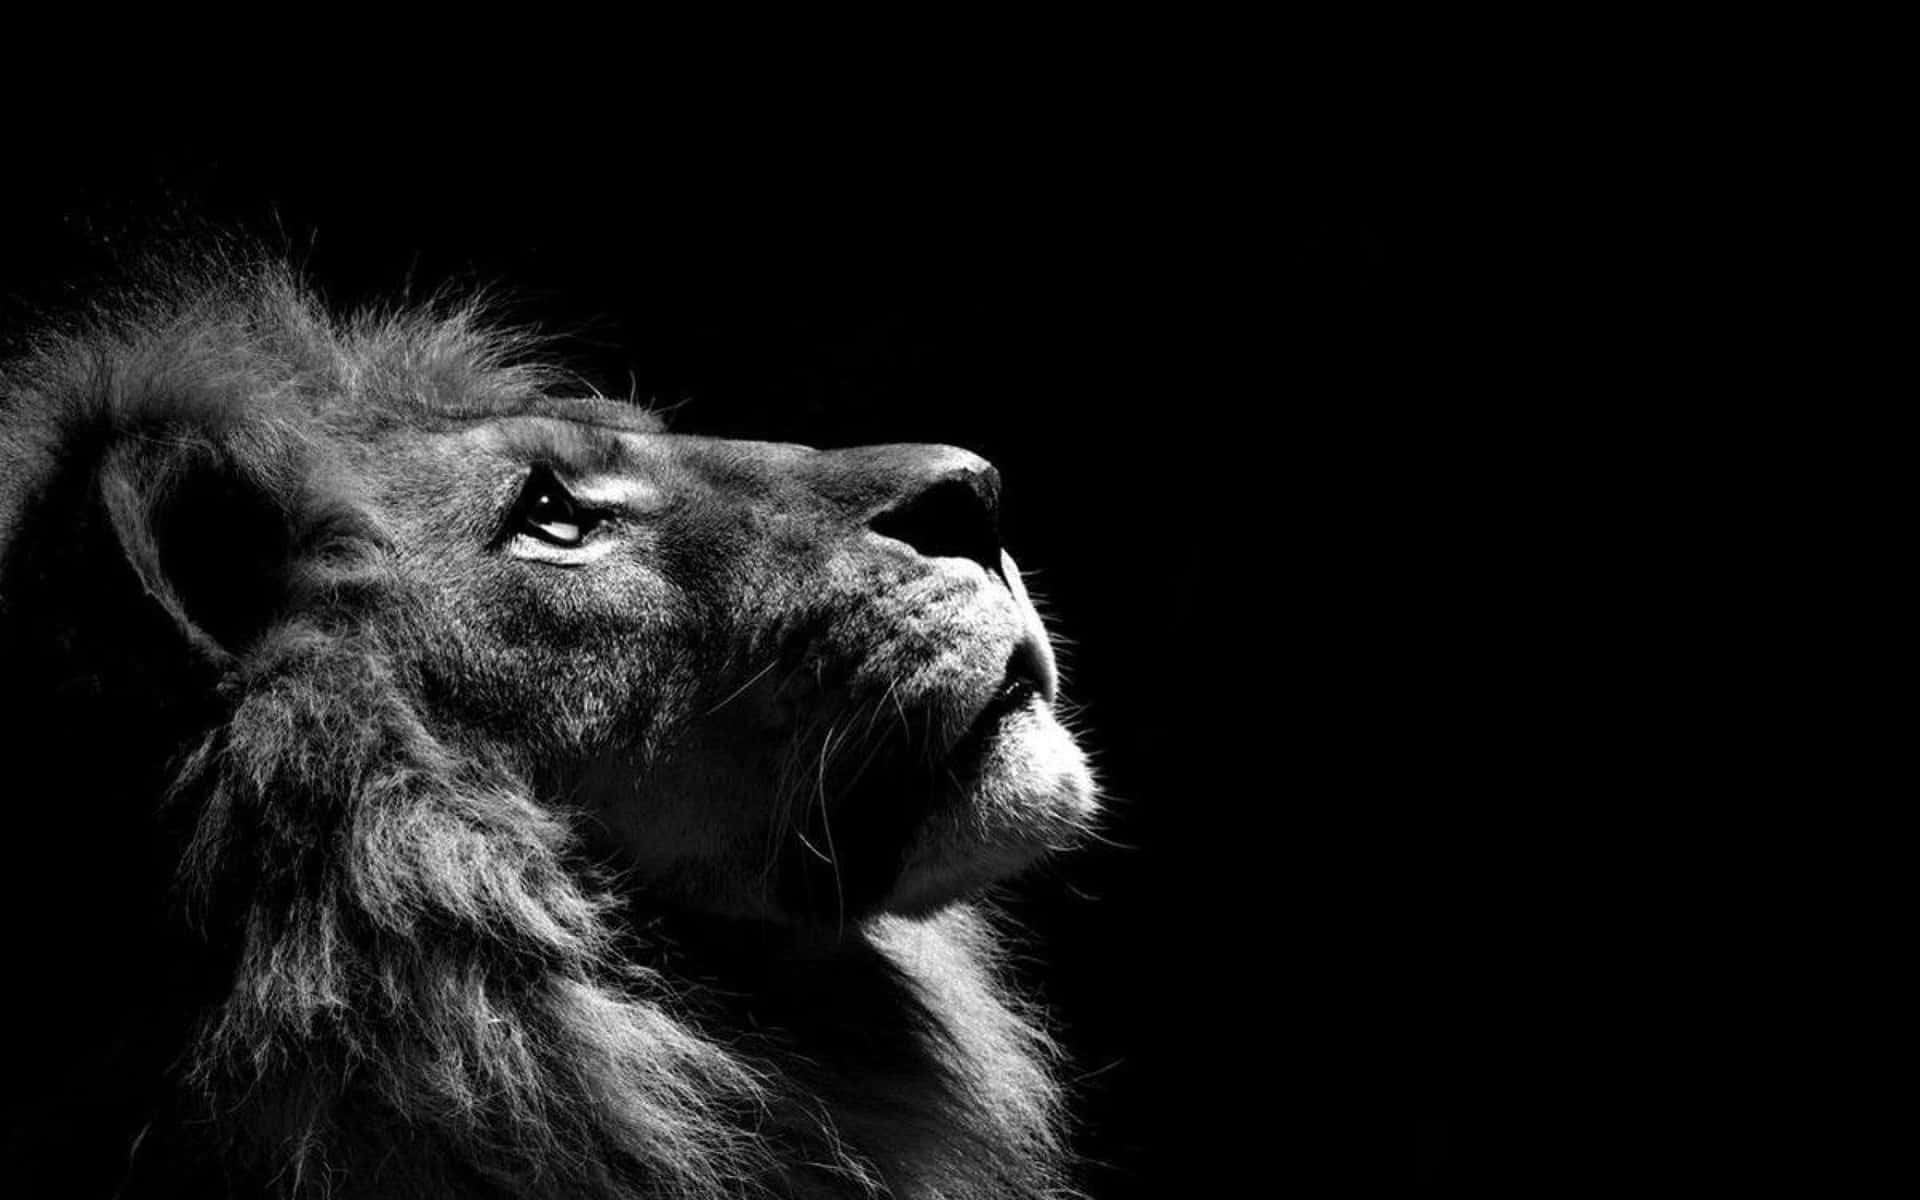 "The Mighty Kings of the Jungle - A Majestic Black and White Lion" Wallpaper